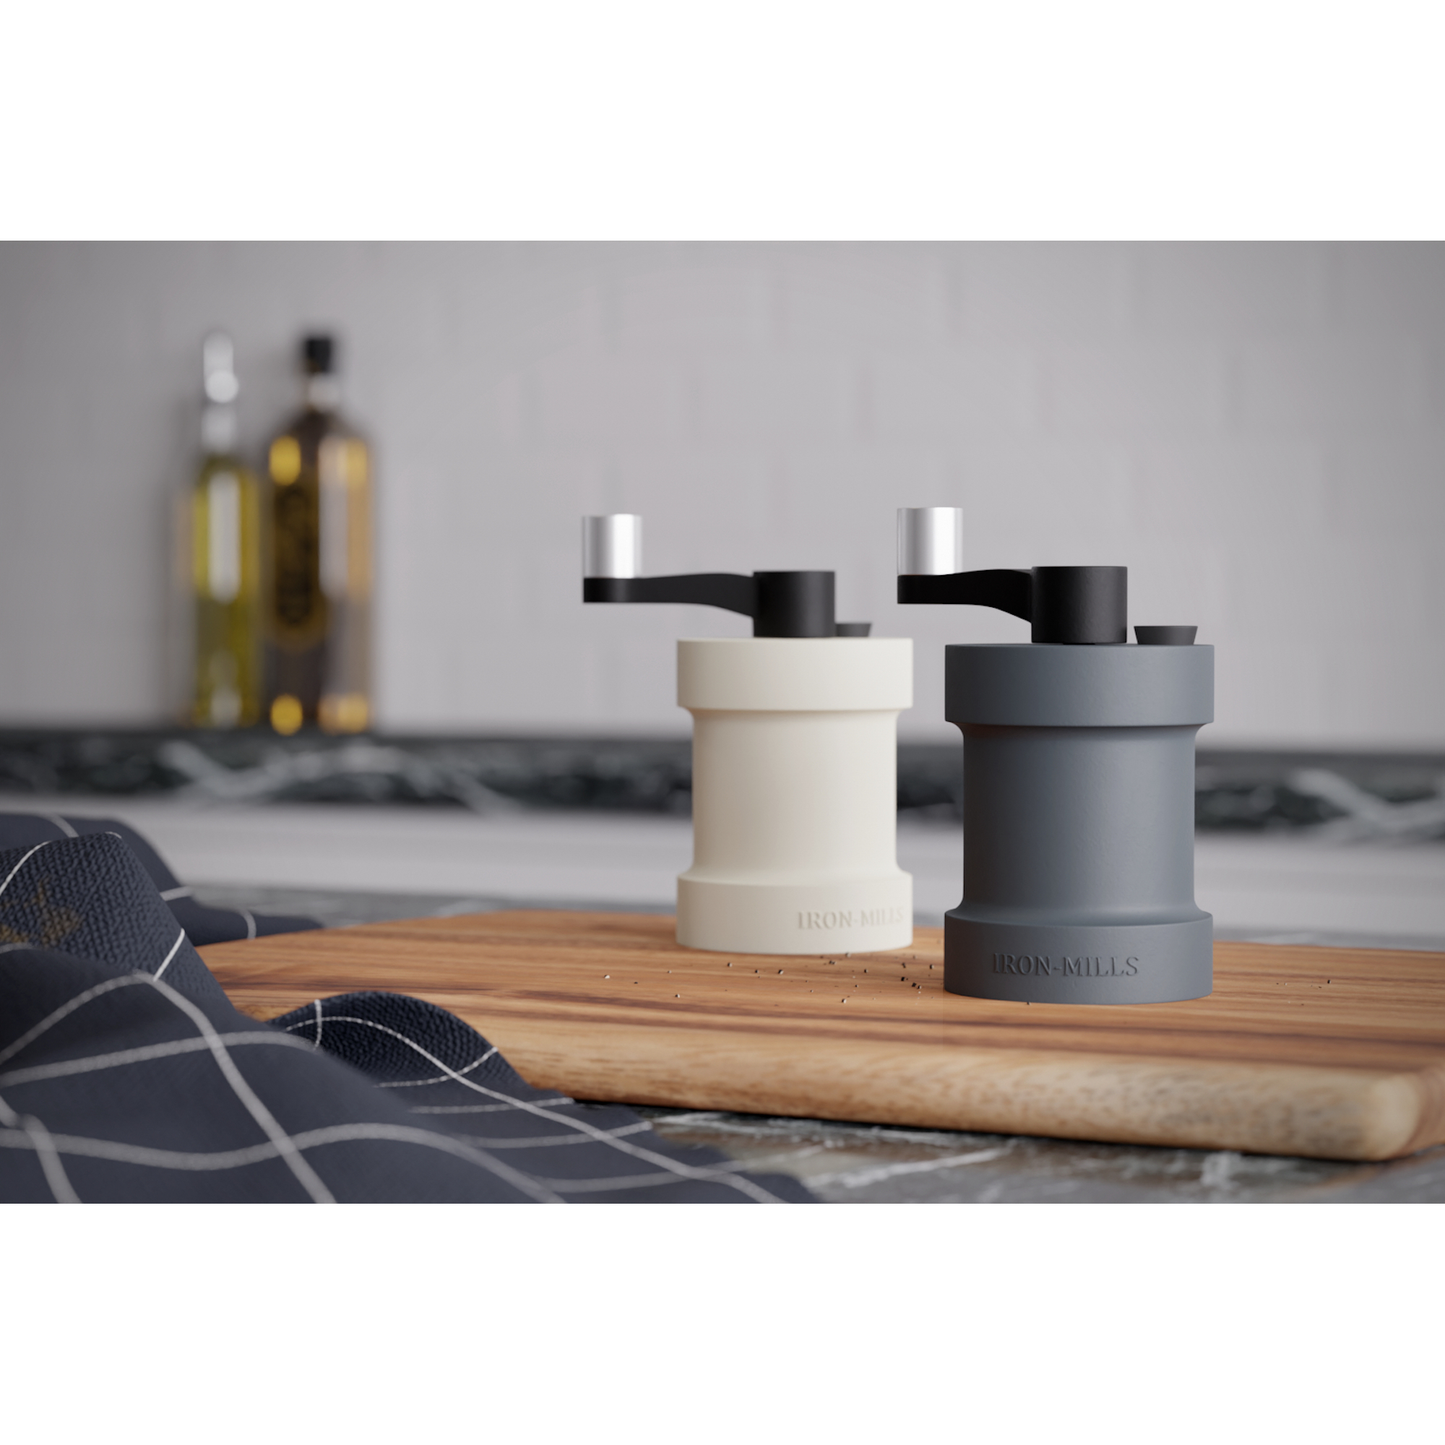 Anthracite Grey & Oyster White Cast Iron Salt and Pepper Mill Set with Crank Handle